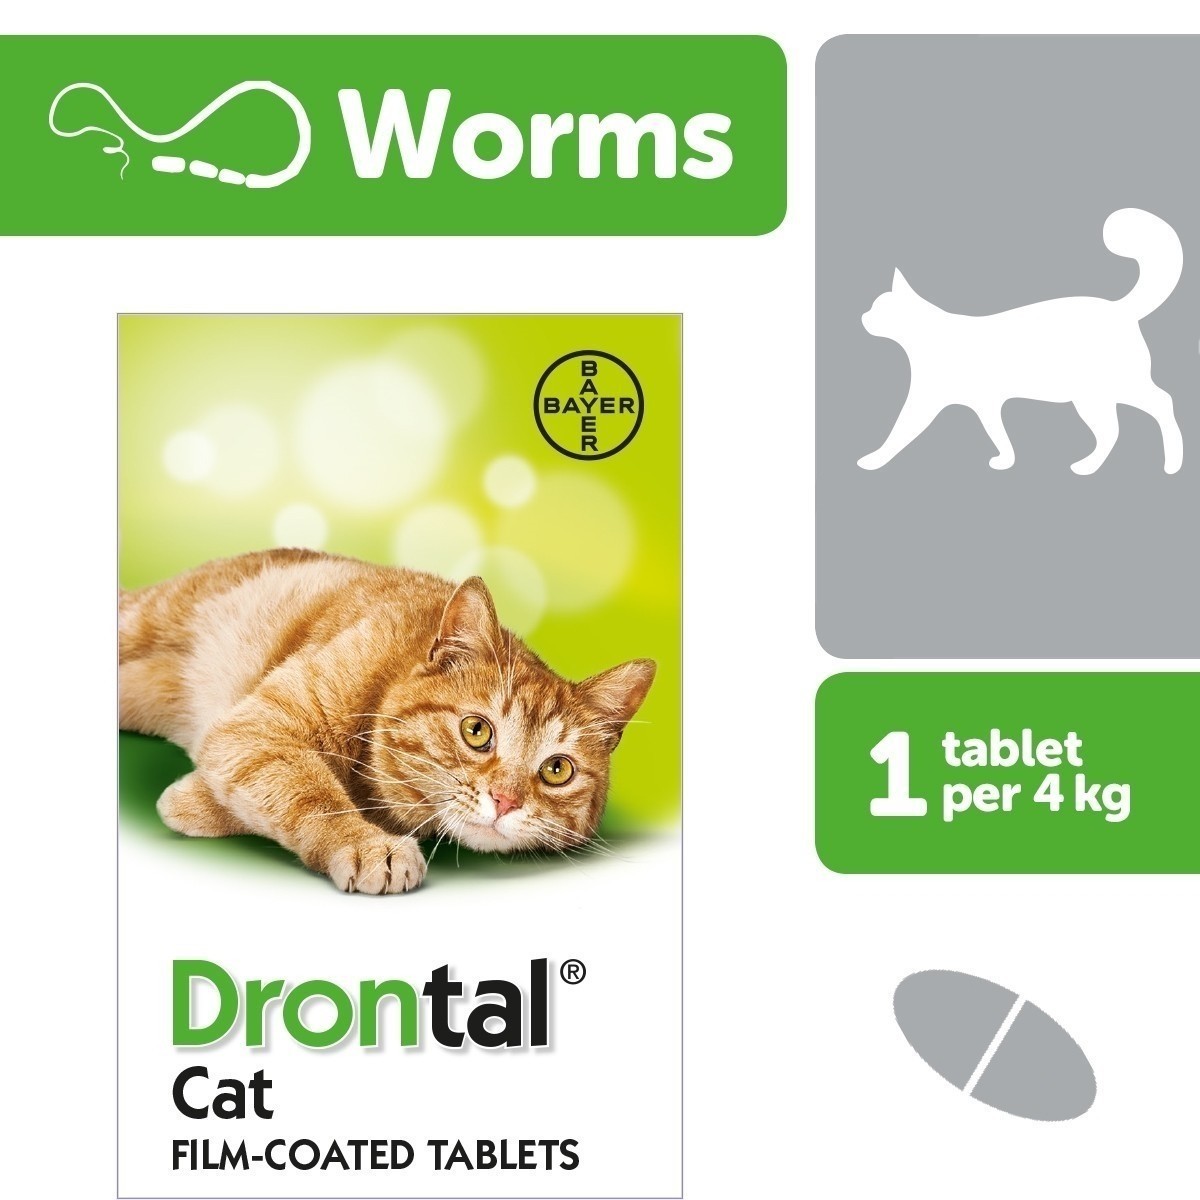 Drontal Cat Worming Tablets - From £1.68